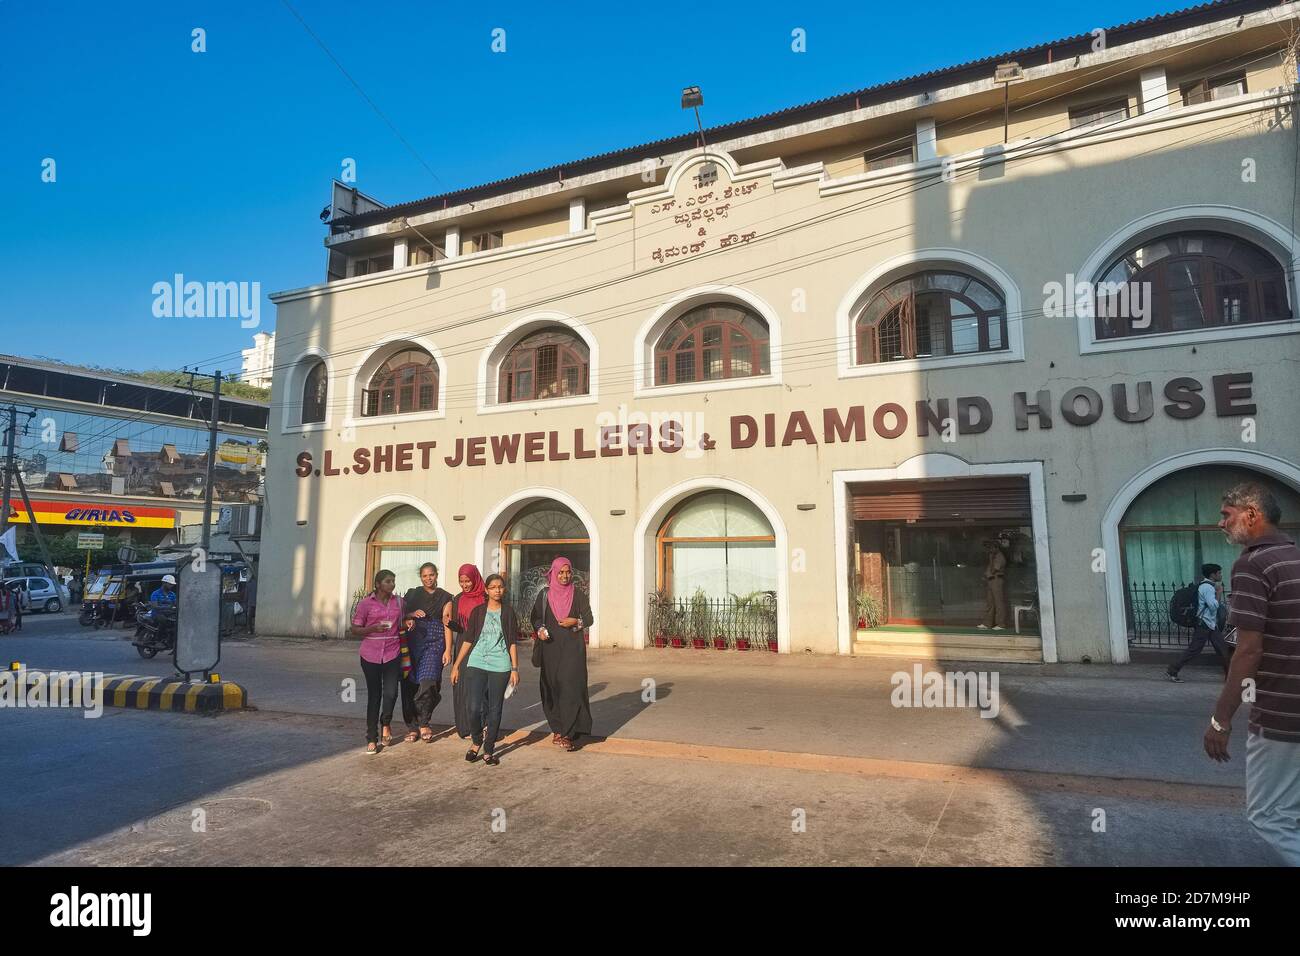 A group of young Indian women, Hindus and Muslims, walking in front of a prominent jewelry shop in the center of Mangalore, Karnataka, South India Stock Photo